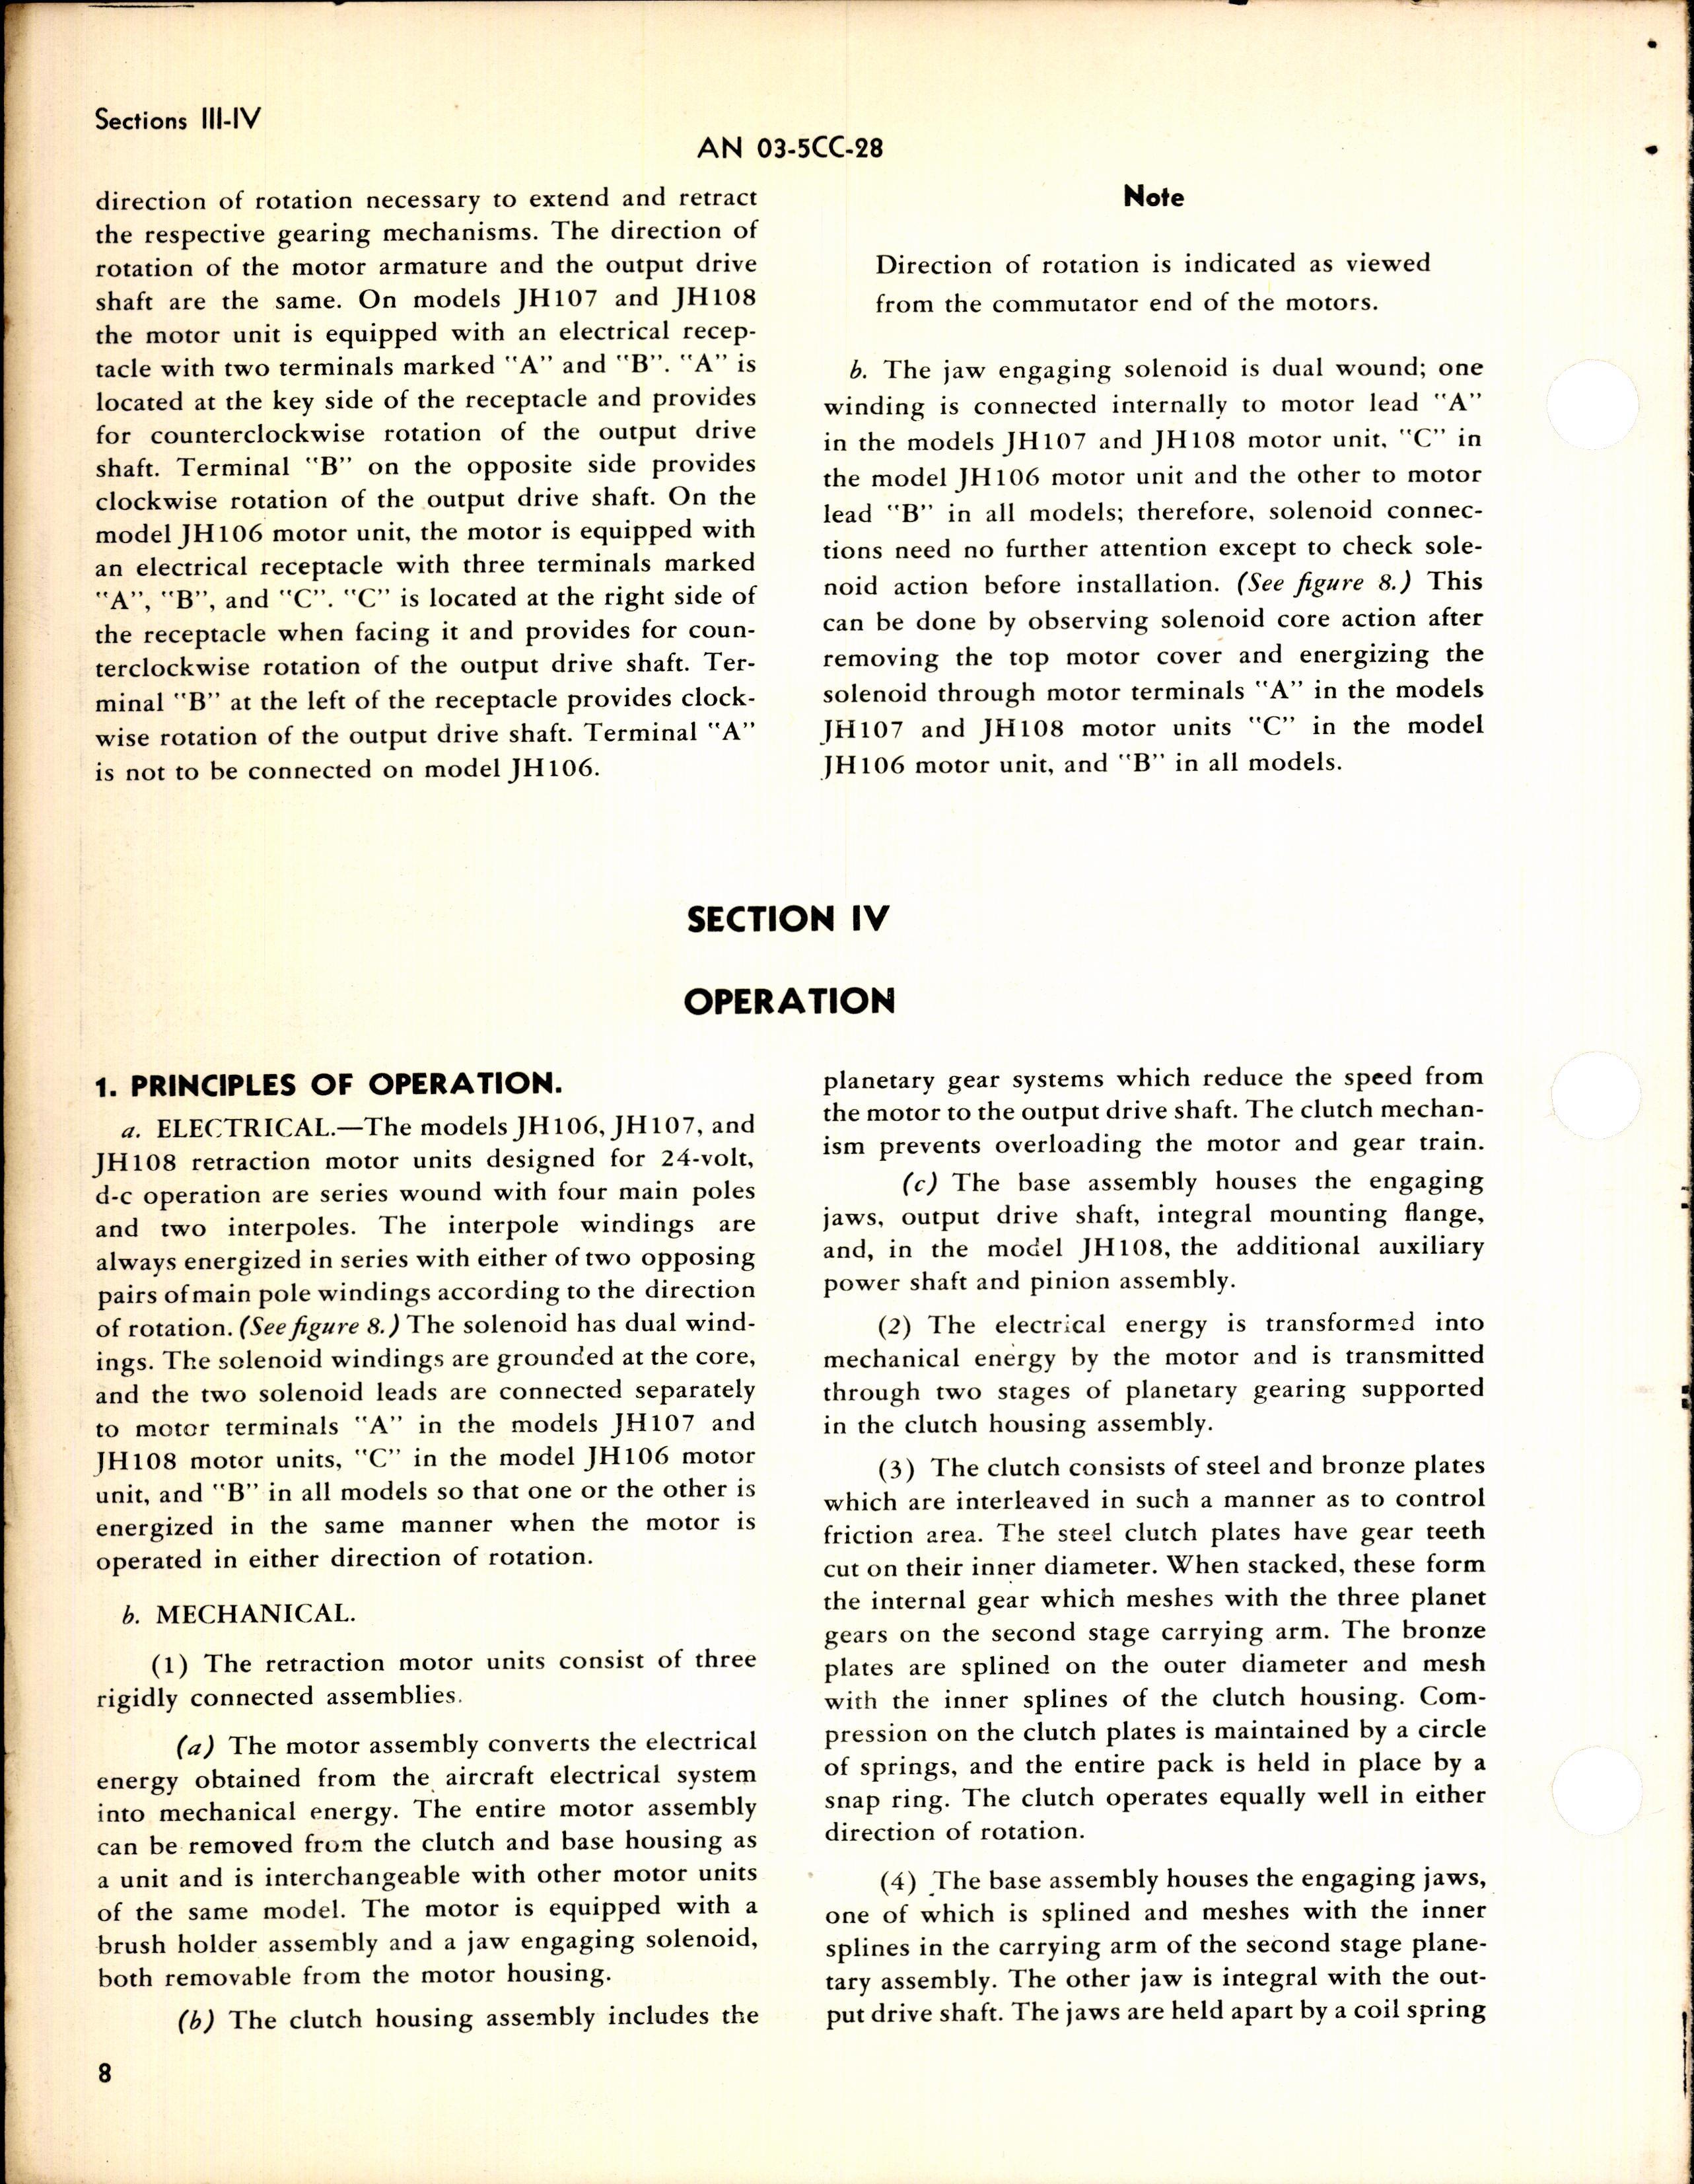 Sample page 4 from AirCorps Library document: Operation, Service, & Overhaul Instructions with Parts Catalog for Jack & Heintz Retracting Motors